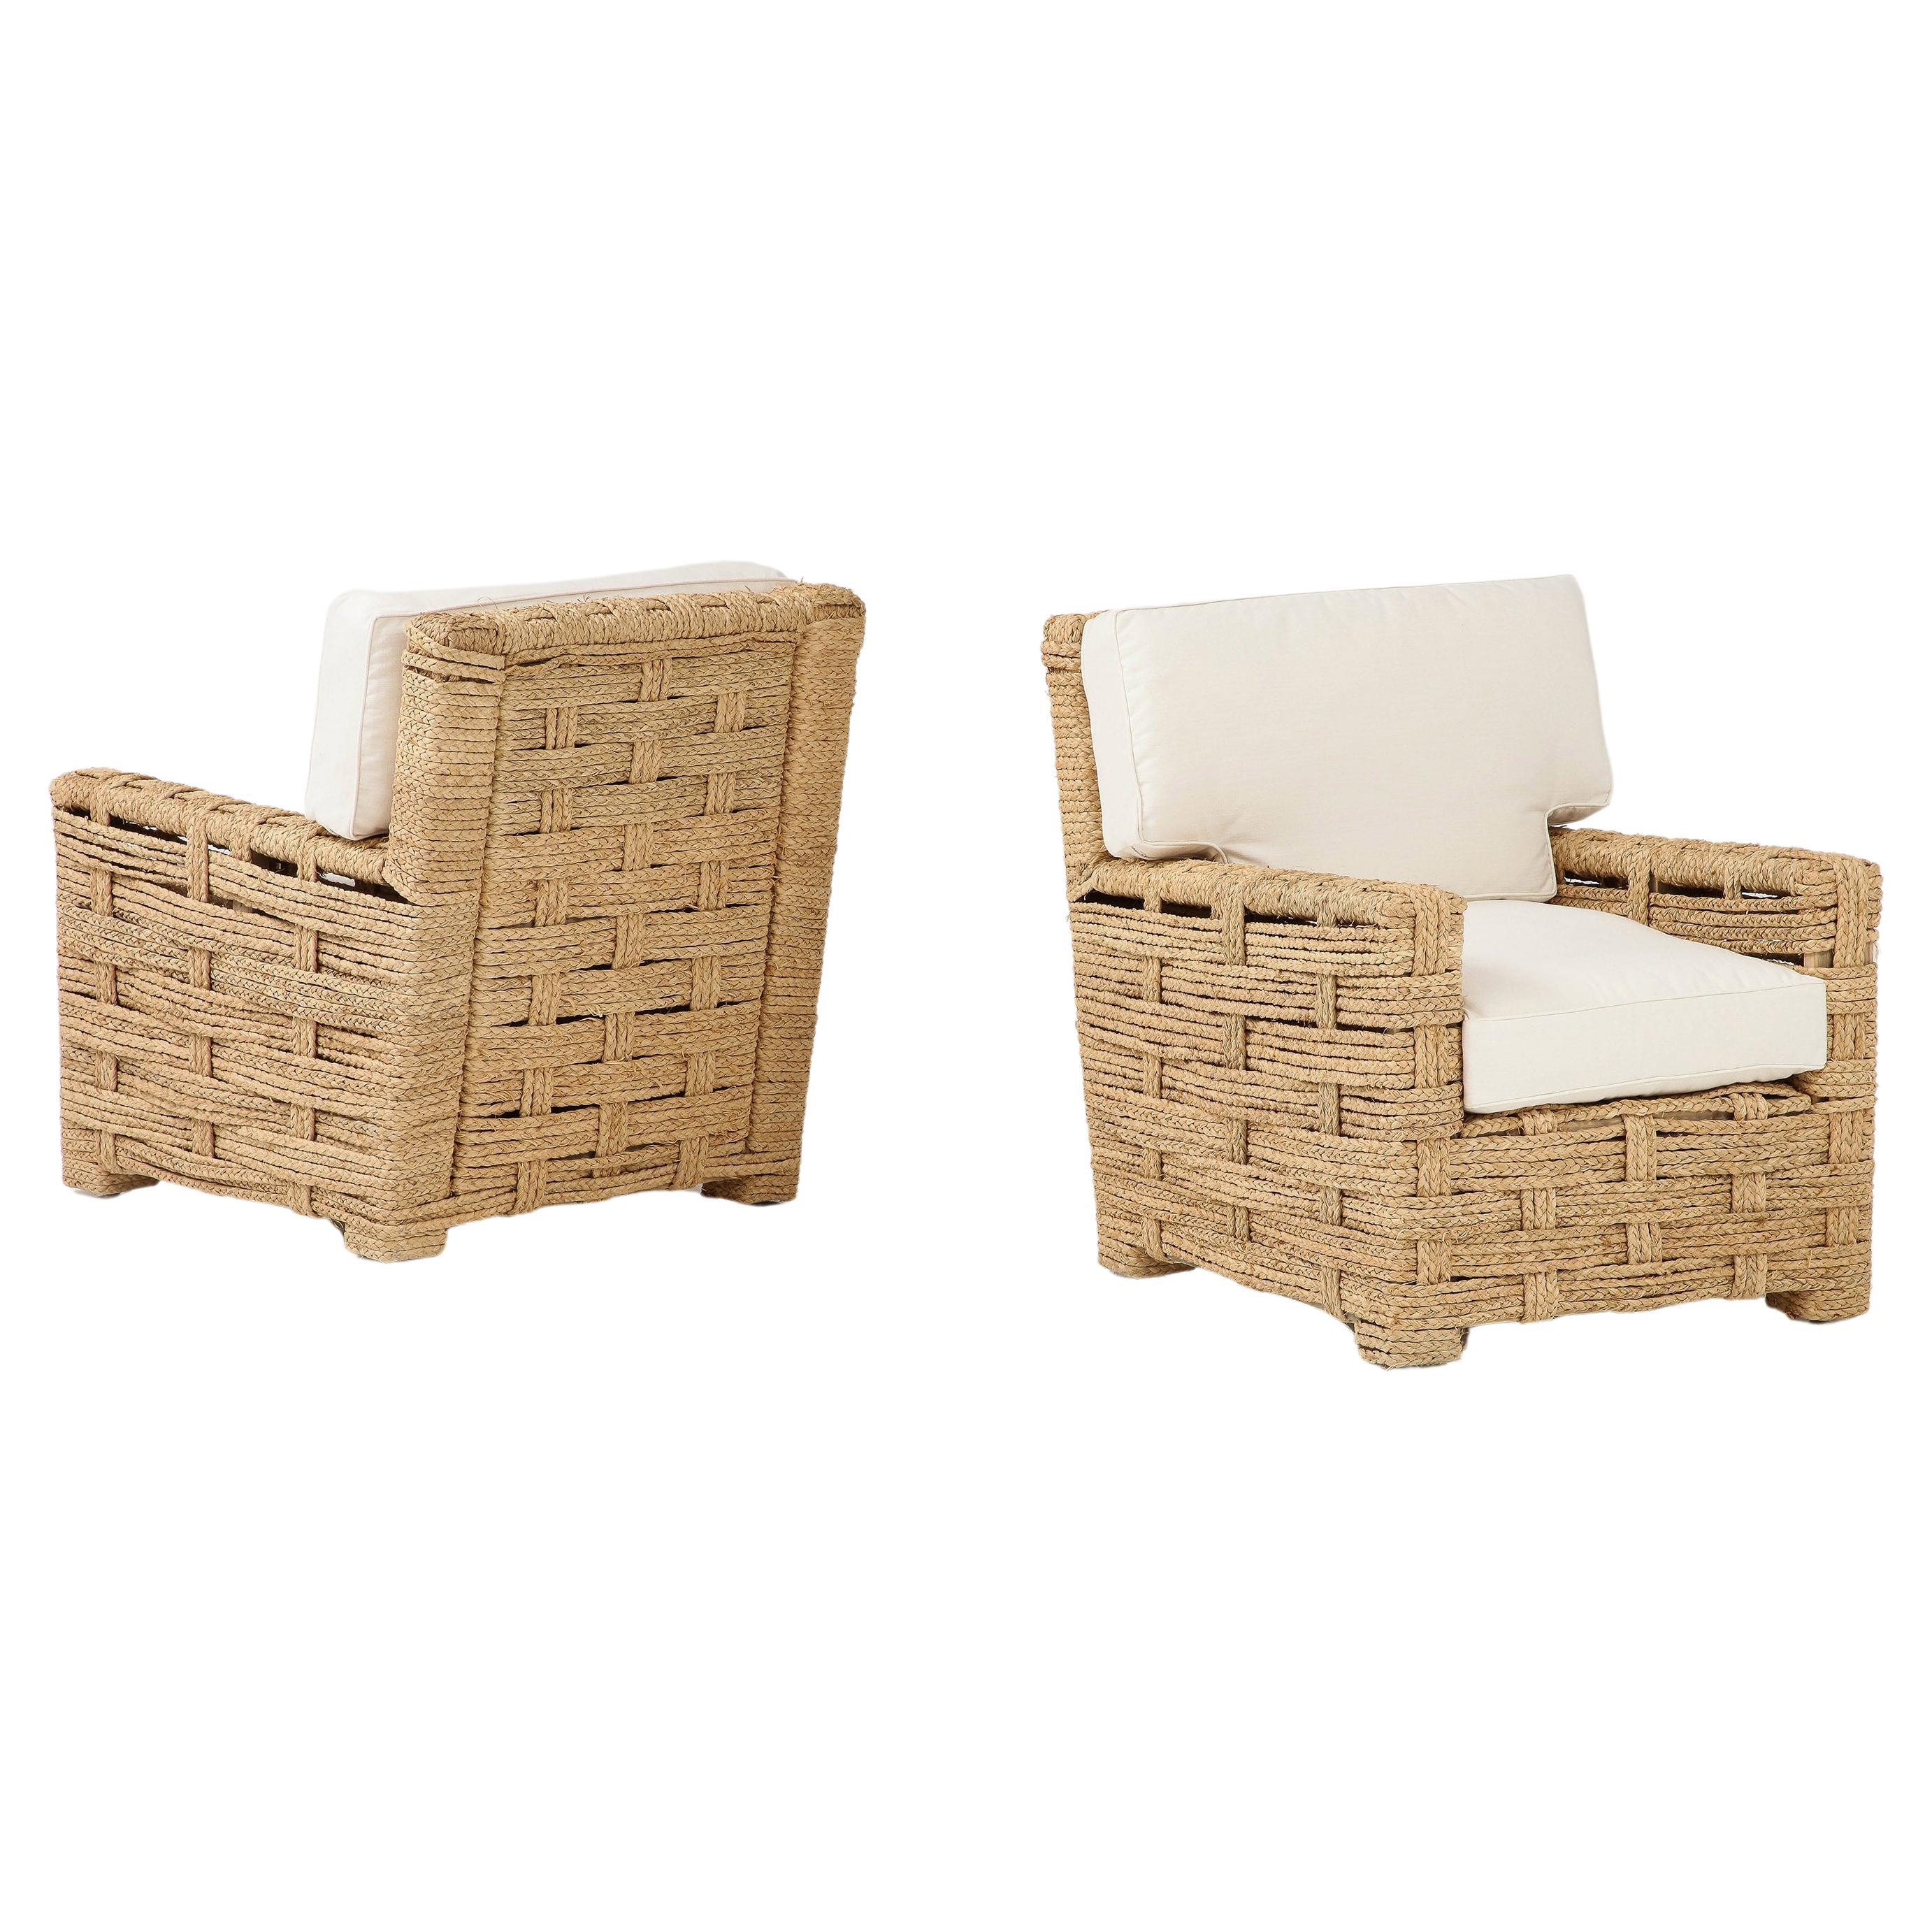 Rare Pare of Raffia Arm Chairs by Adrien Audoux and Frida Minet For Sale